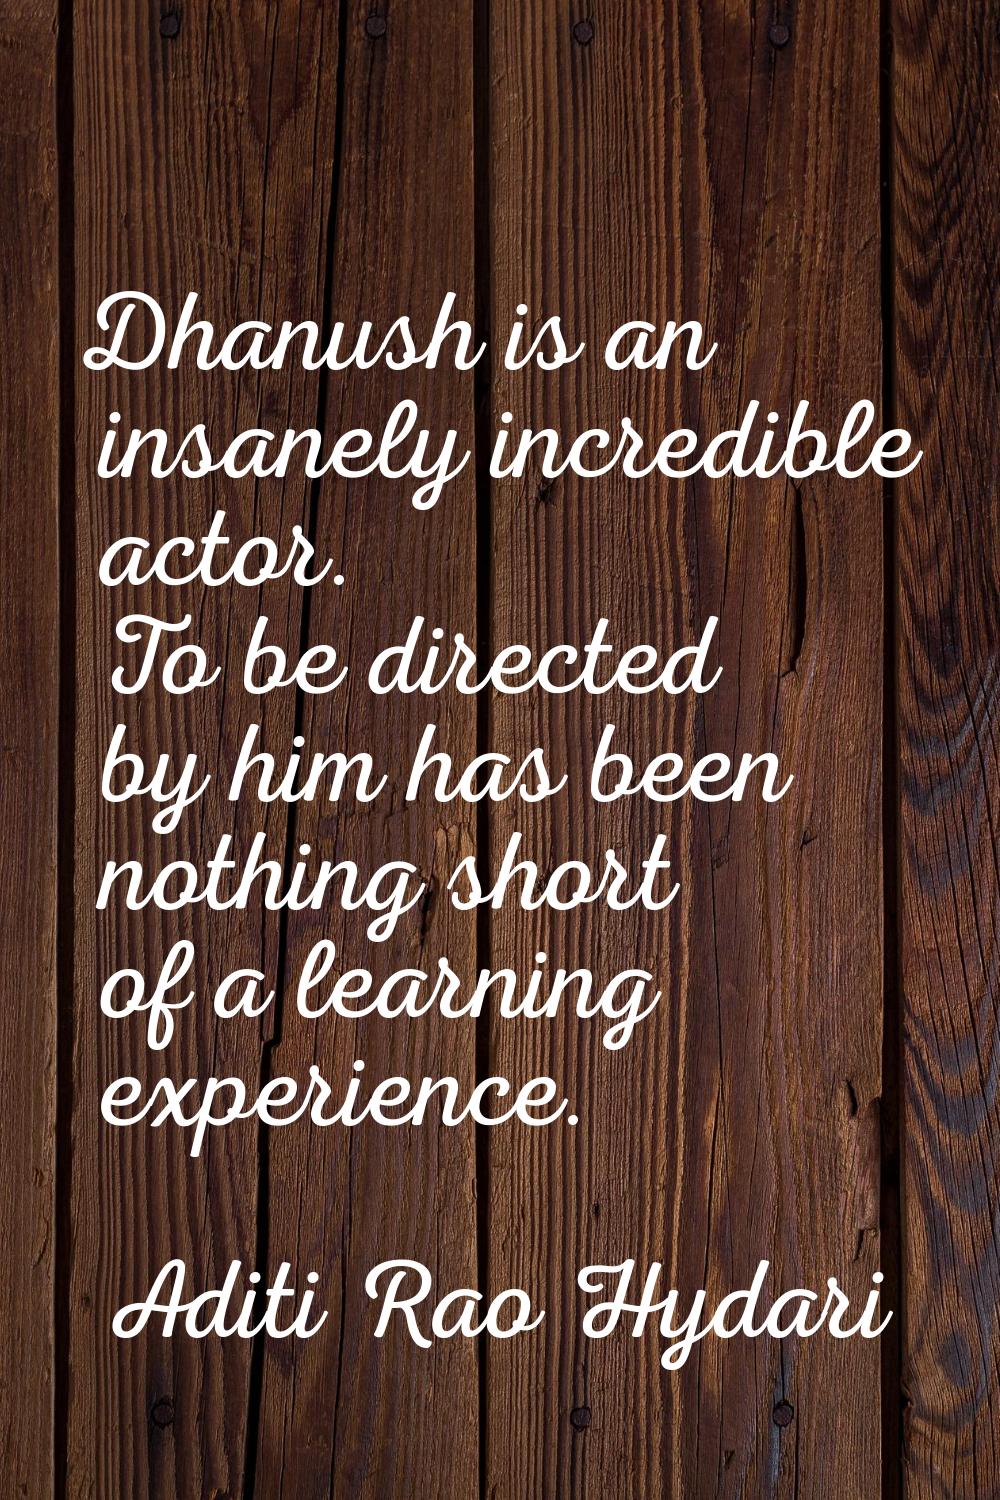 Dhanush is an insanely incredible actor. To be directed by him has been nothing short of a learning